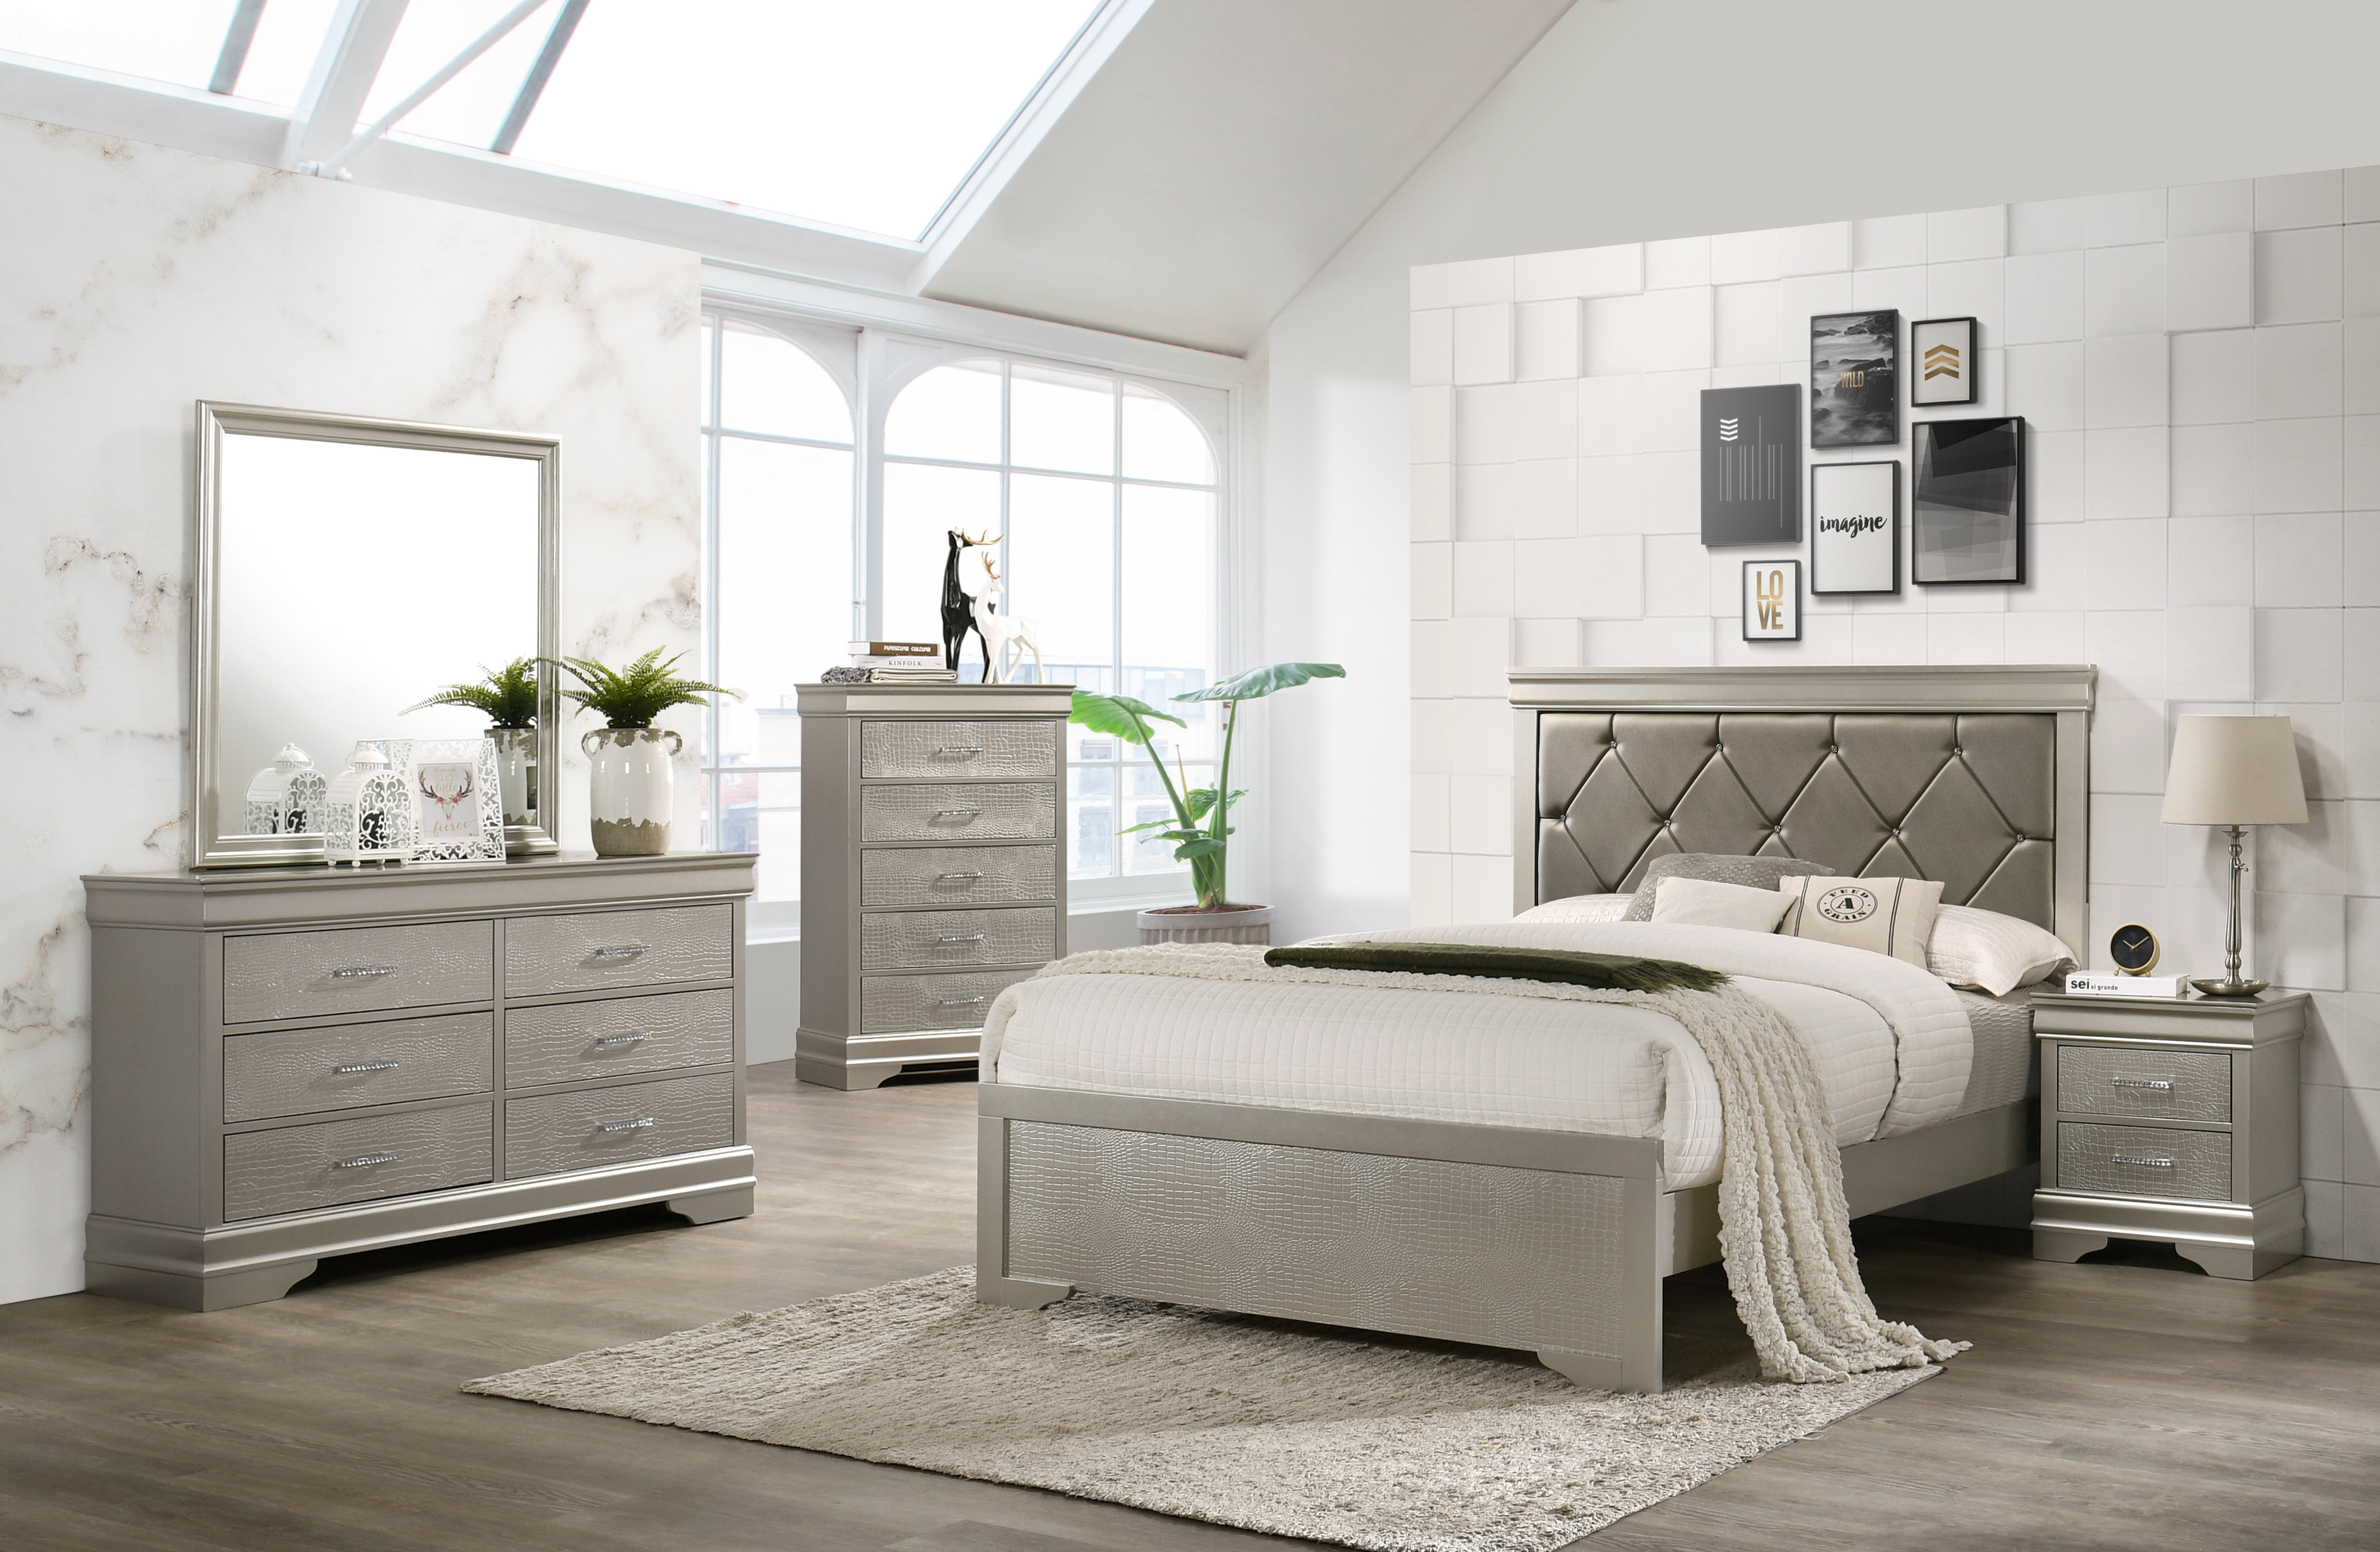 CLEARANCE! 5 Pieces Off White Simple Style Manufacture Wood Bedroom Sets  with Twin bed, Nightstand*2, Chest and Dresser 